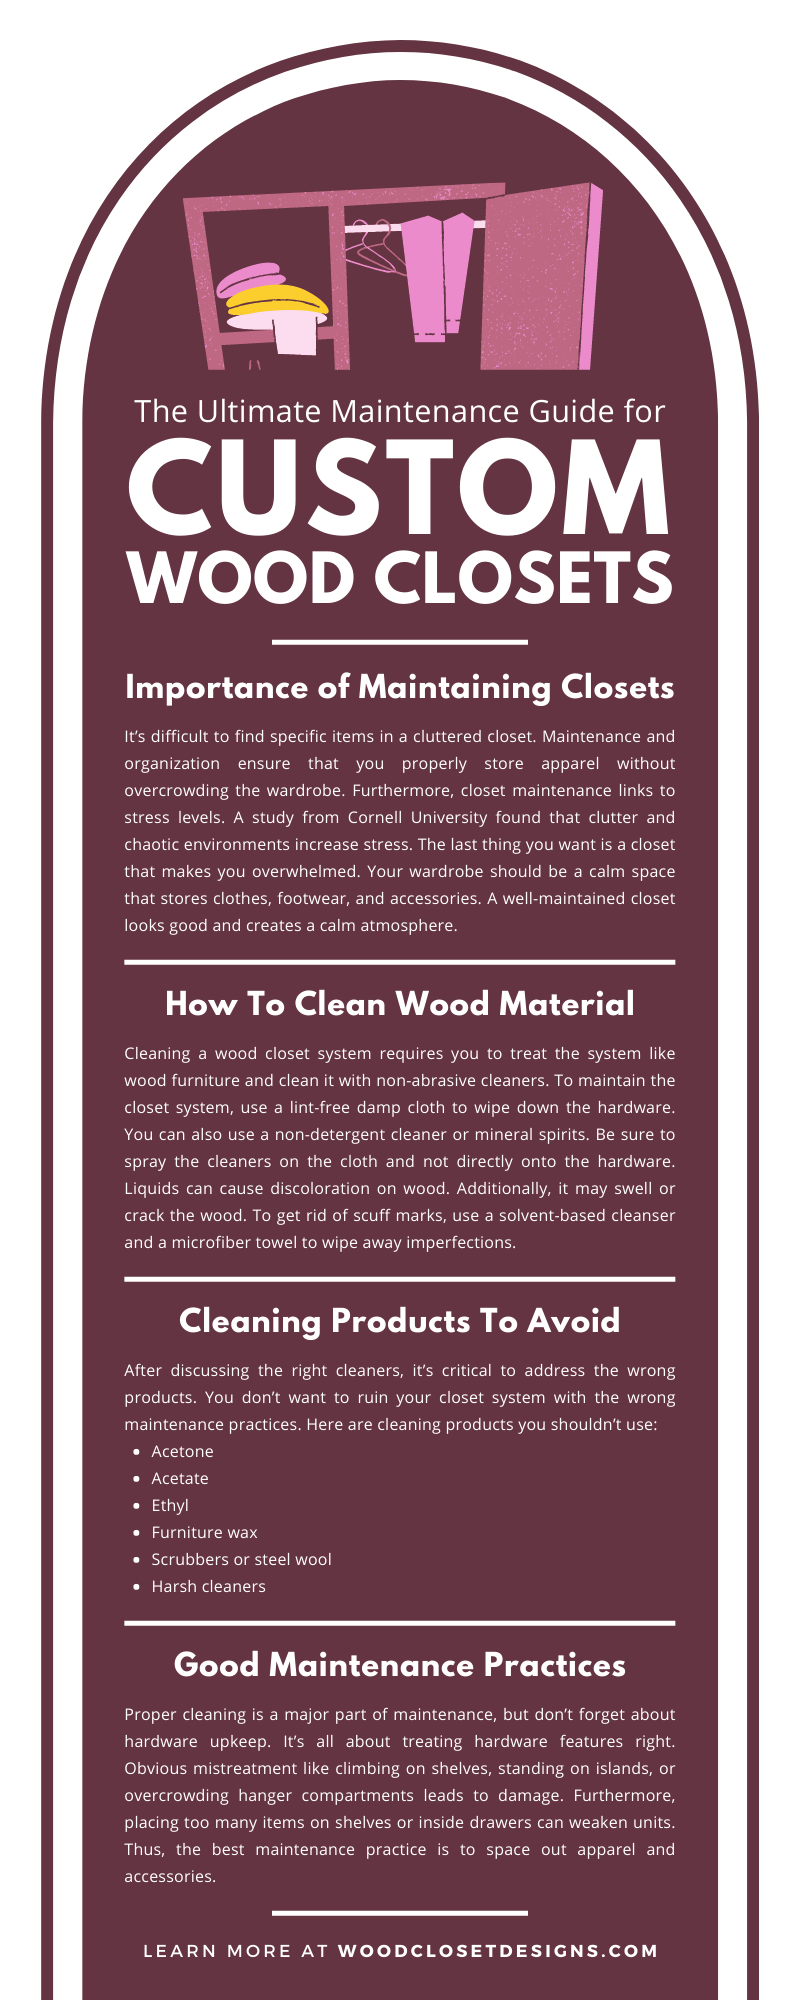 The Ultimate Maintenance Guide for Custom Wood Closets